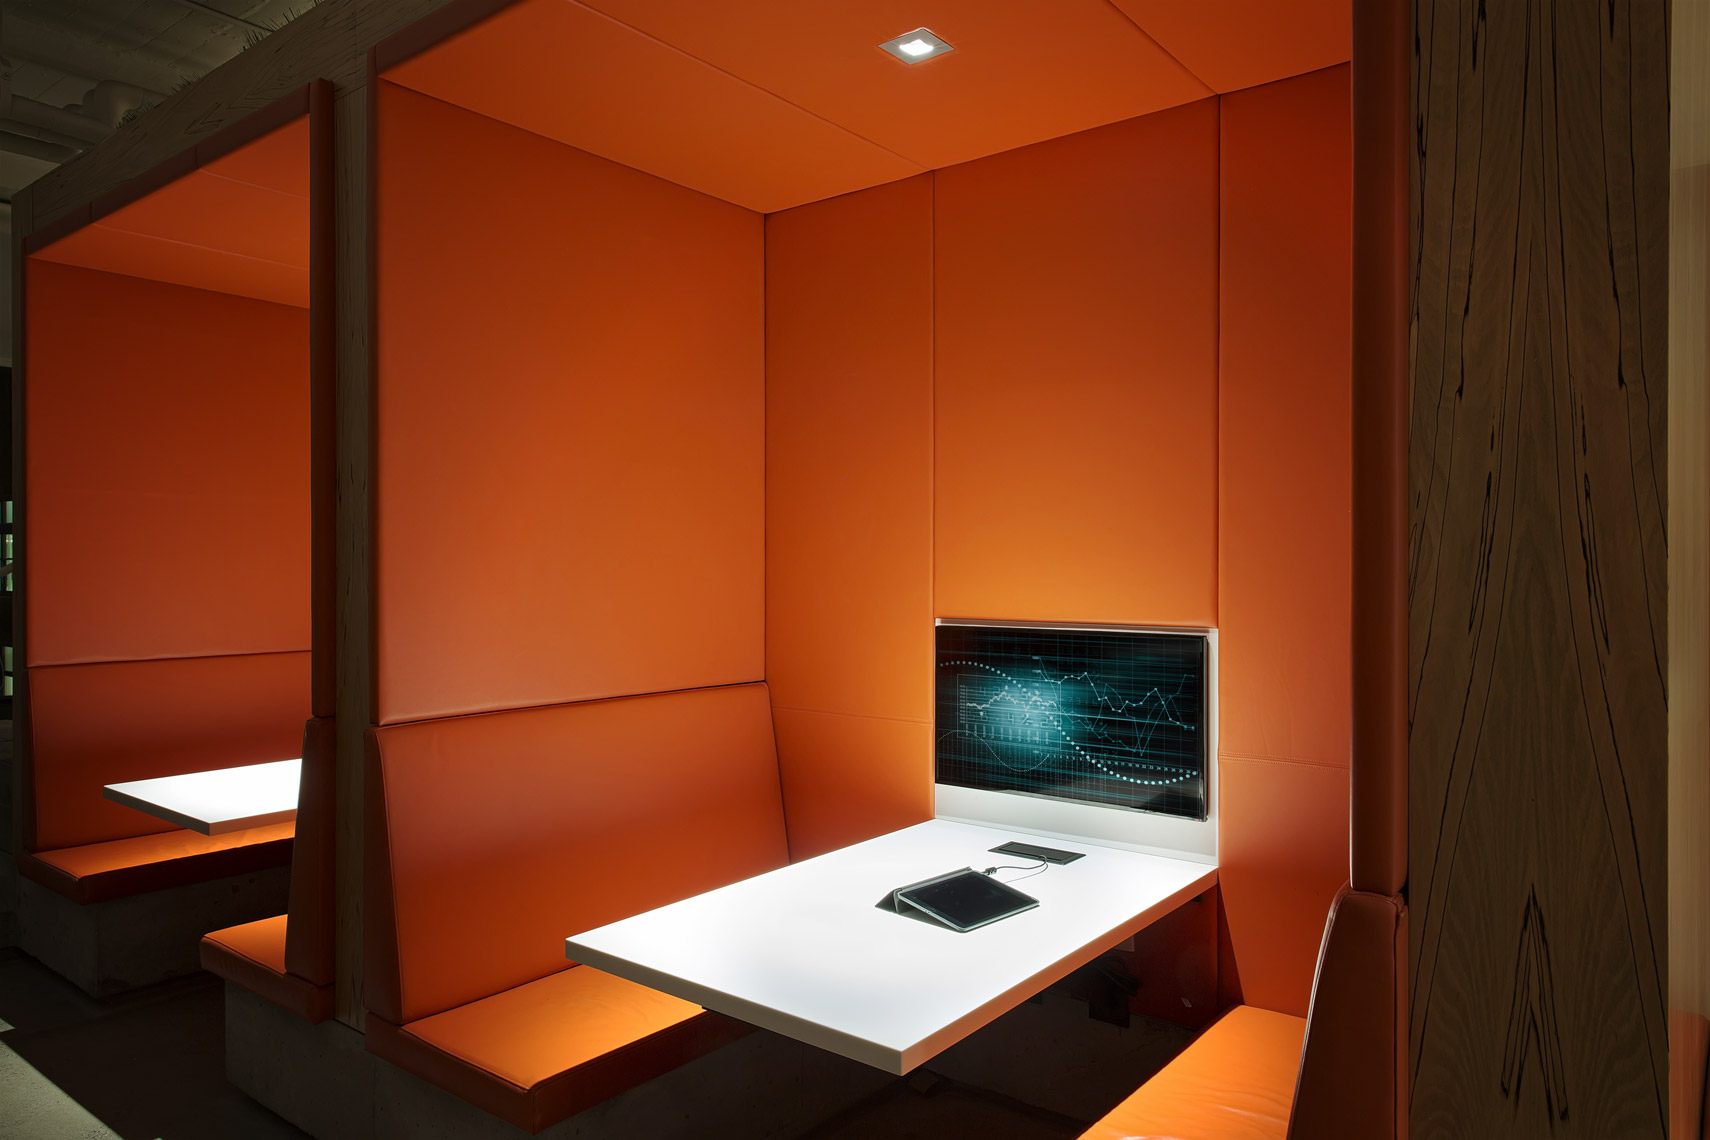 A minimalistic and modern office nook fit for the productive professional of any size. Interior photographer New York